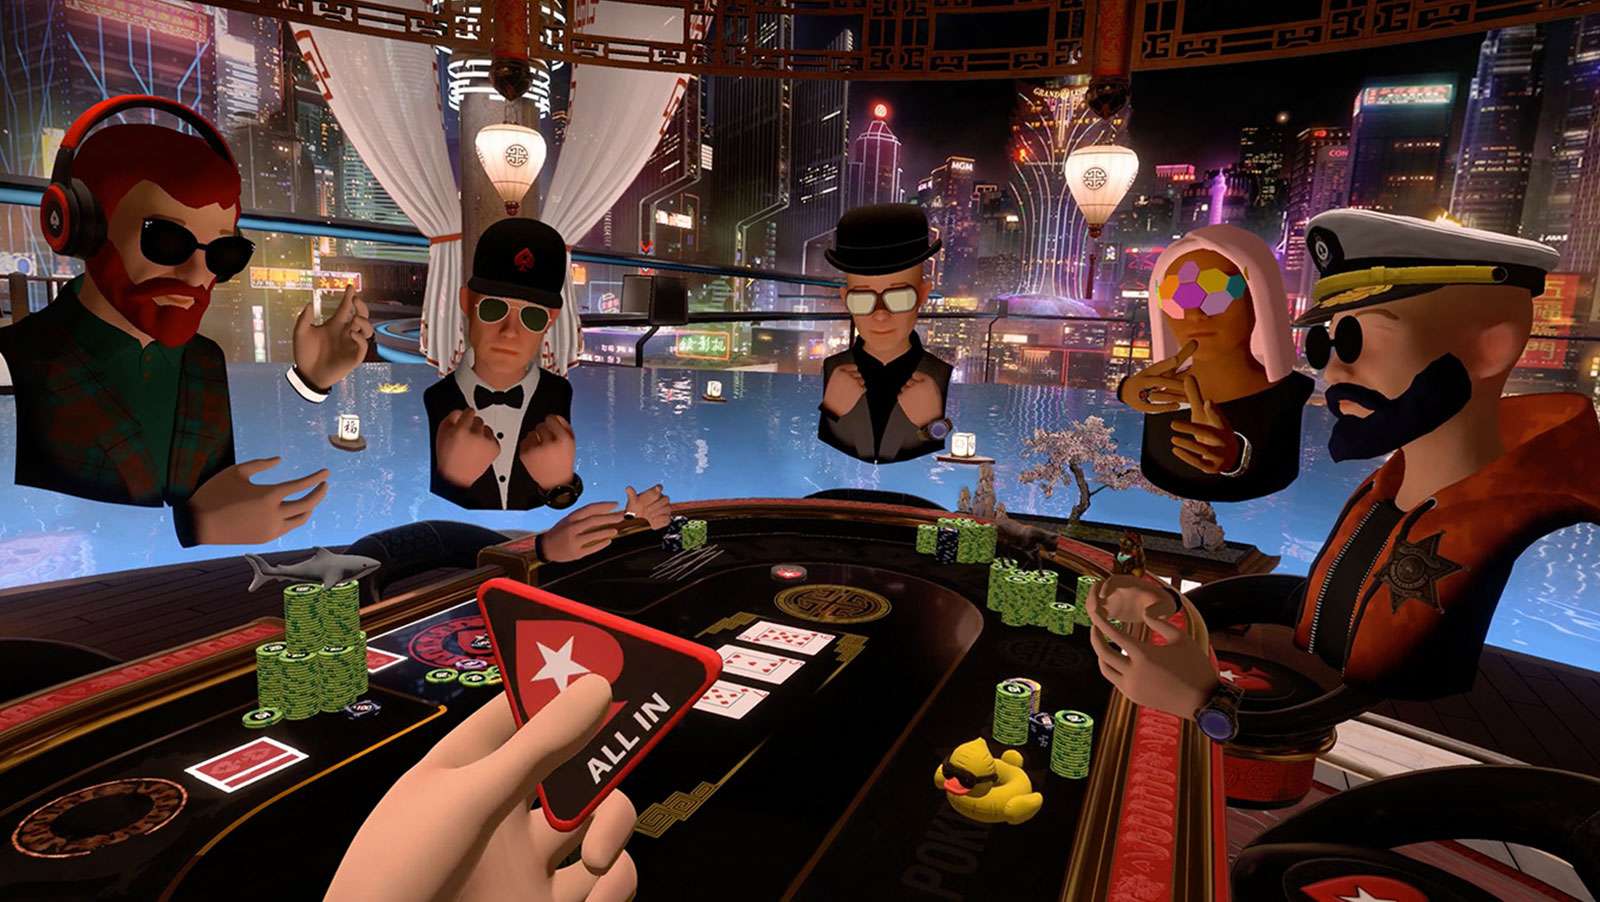 PokerStars VR launches globally with Oculus Rift and HTC Vive